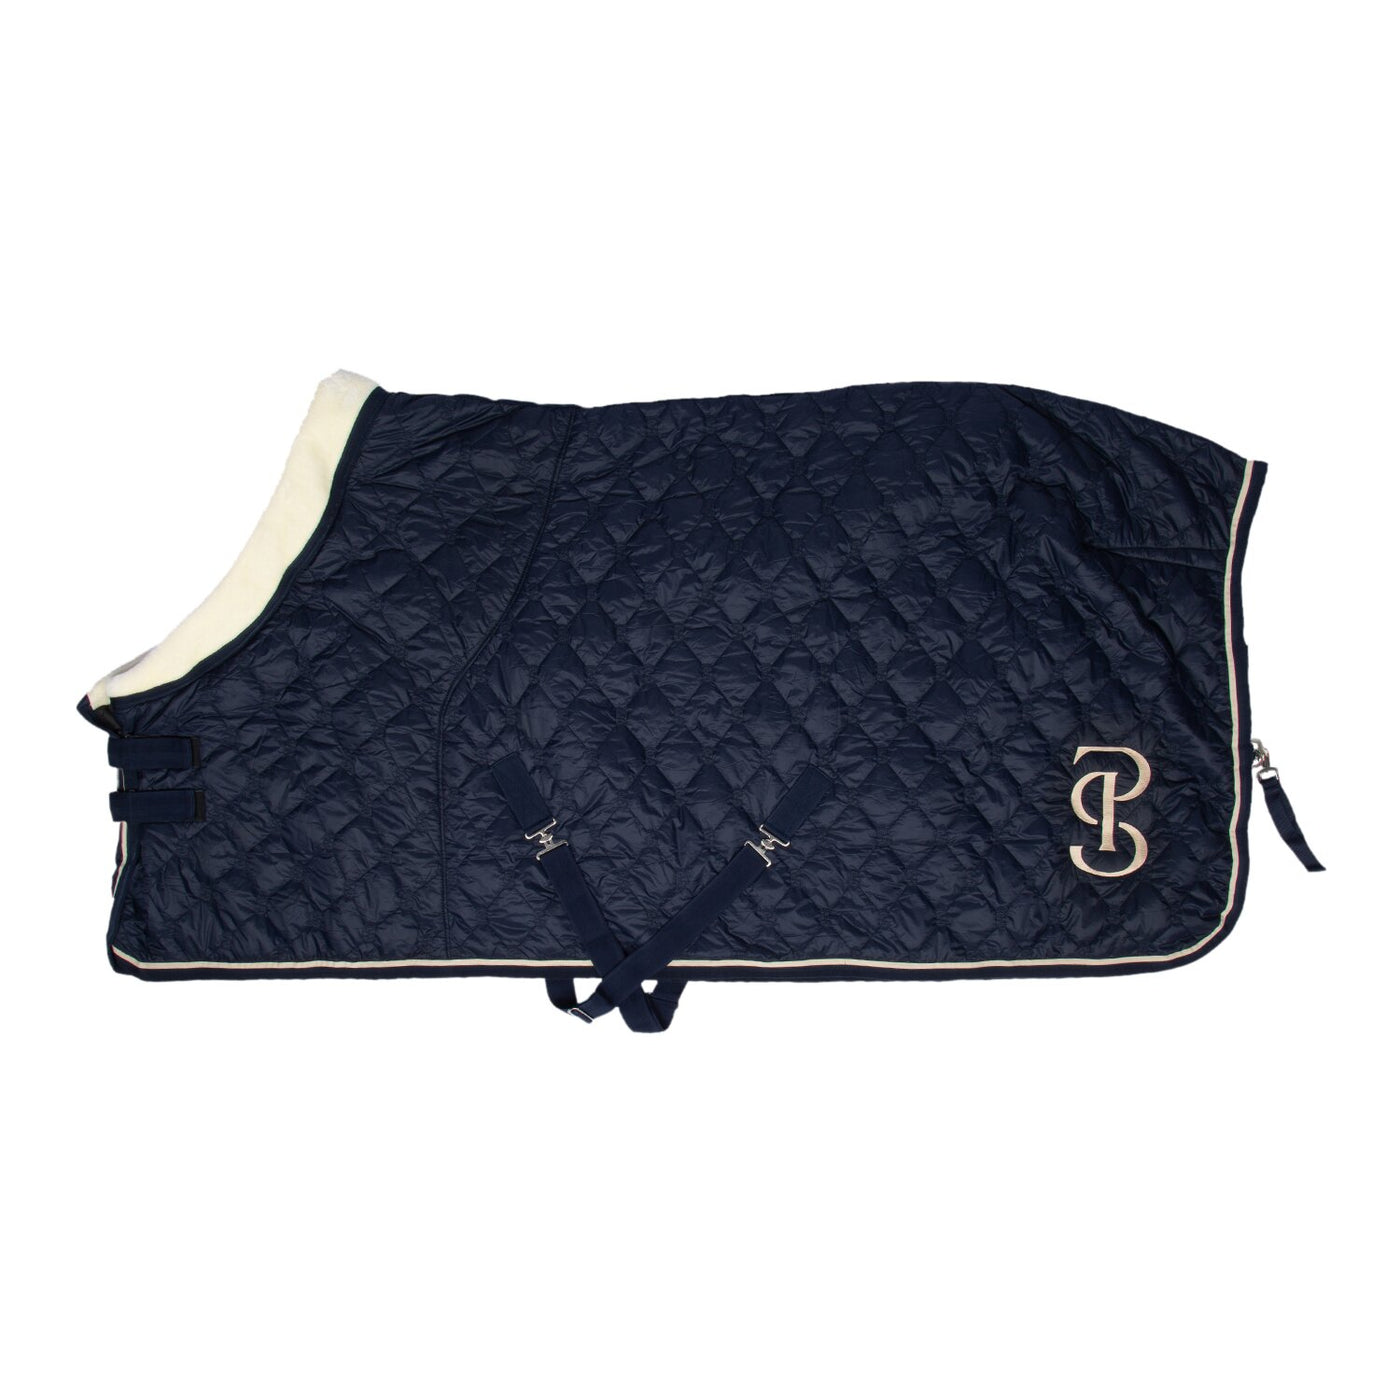 Signature stable blanket